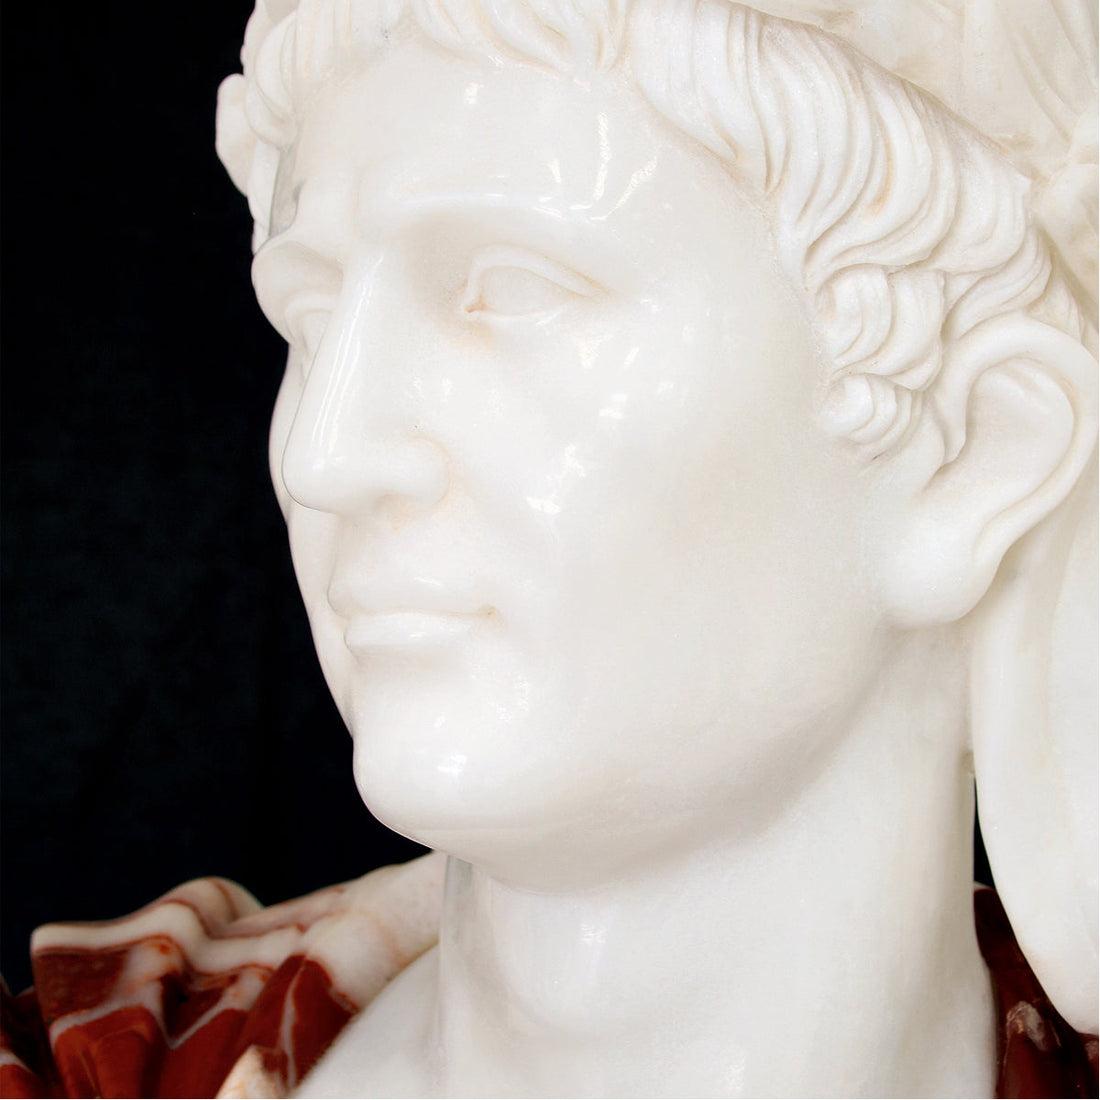 Currey and Company Cristos Marble Bust Sculpture